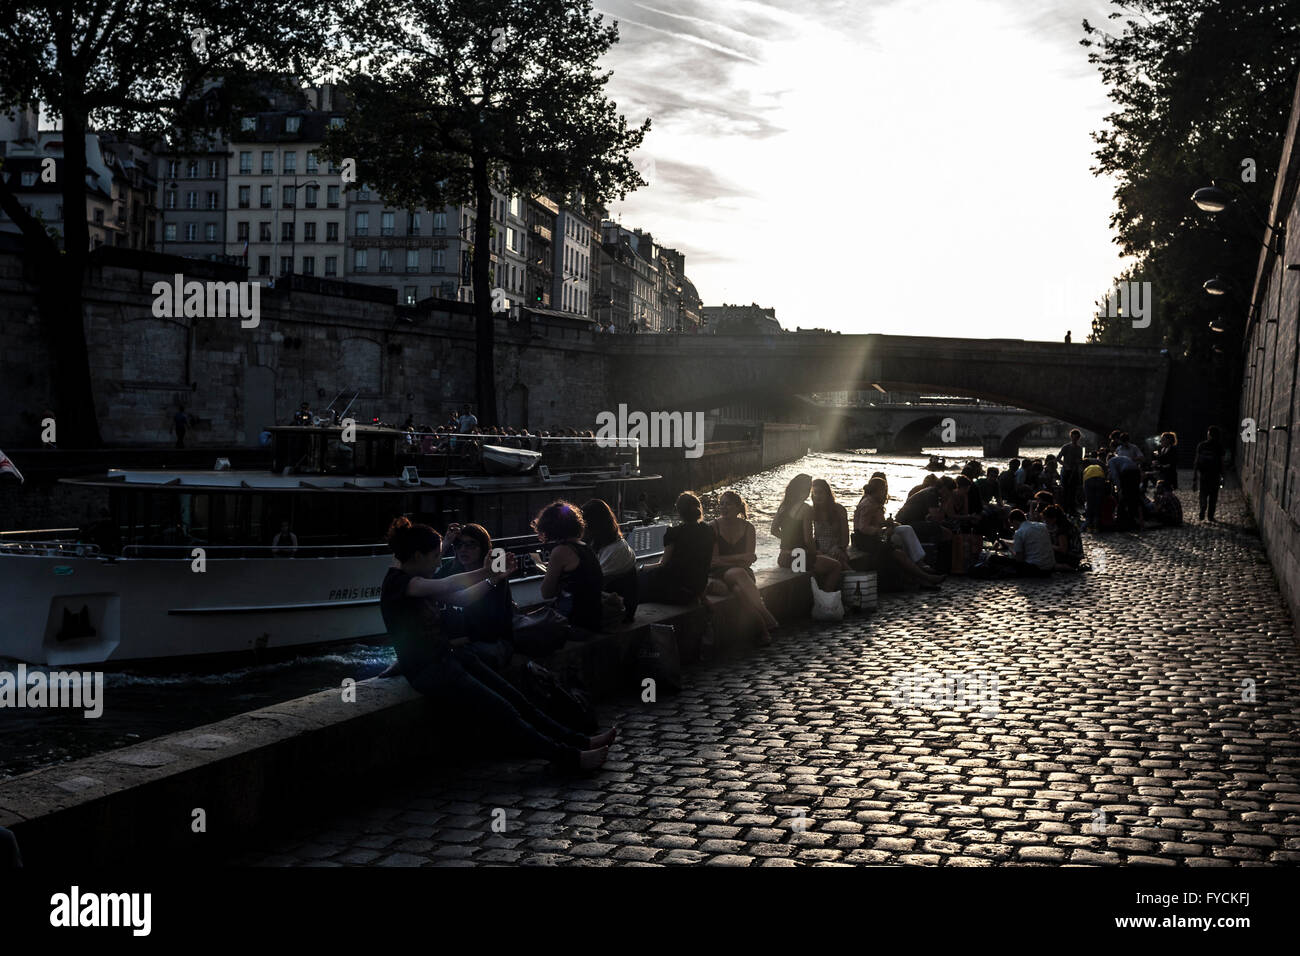 A general view of sunset in Paris where members of the public enjoying talking next to a canal. France. Stock Photo